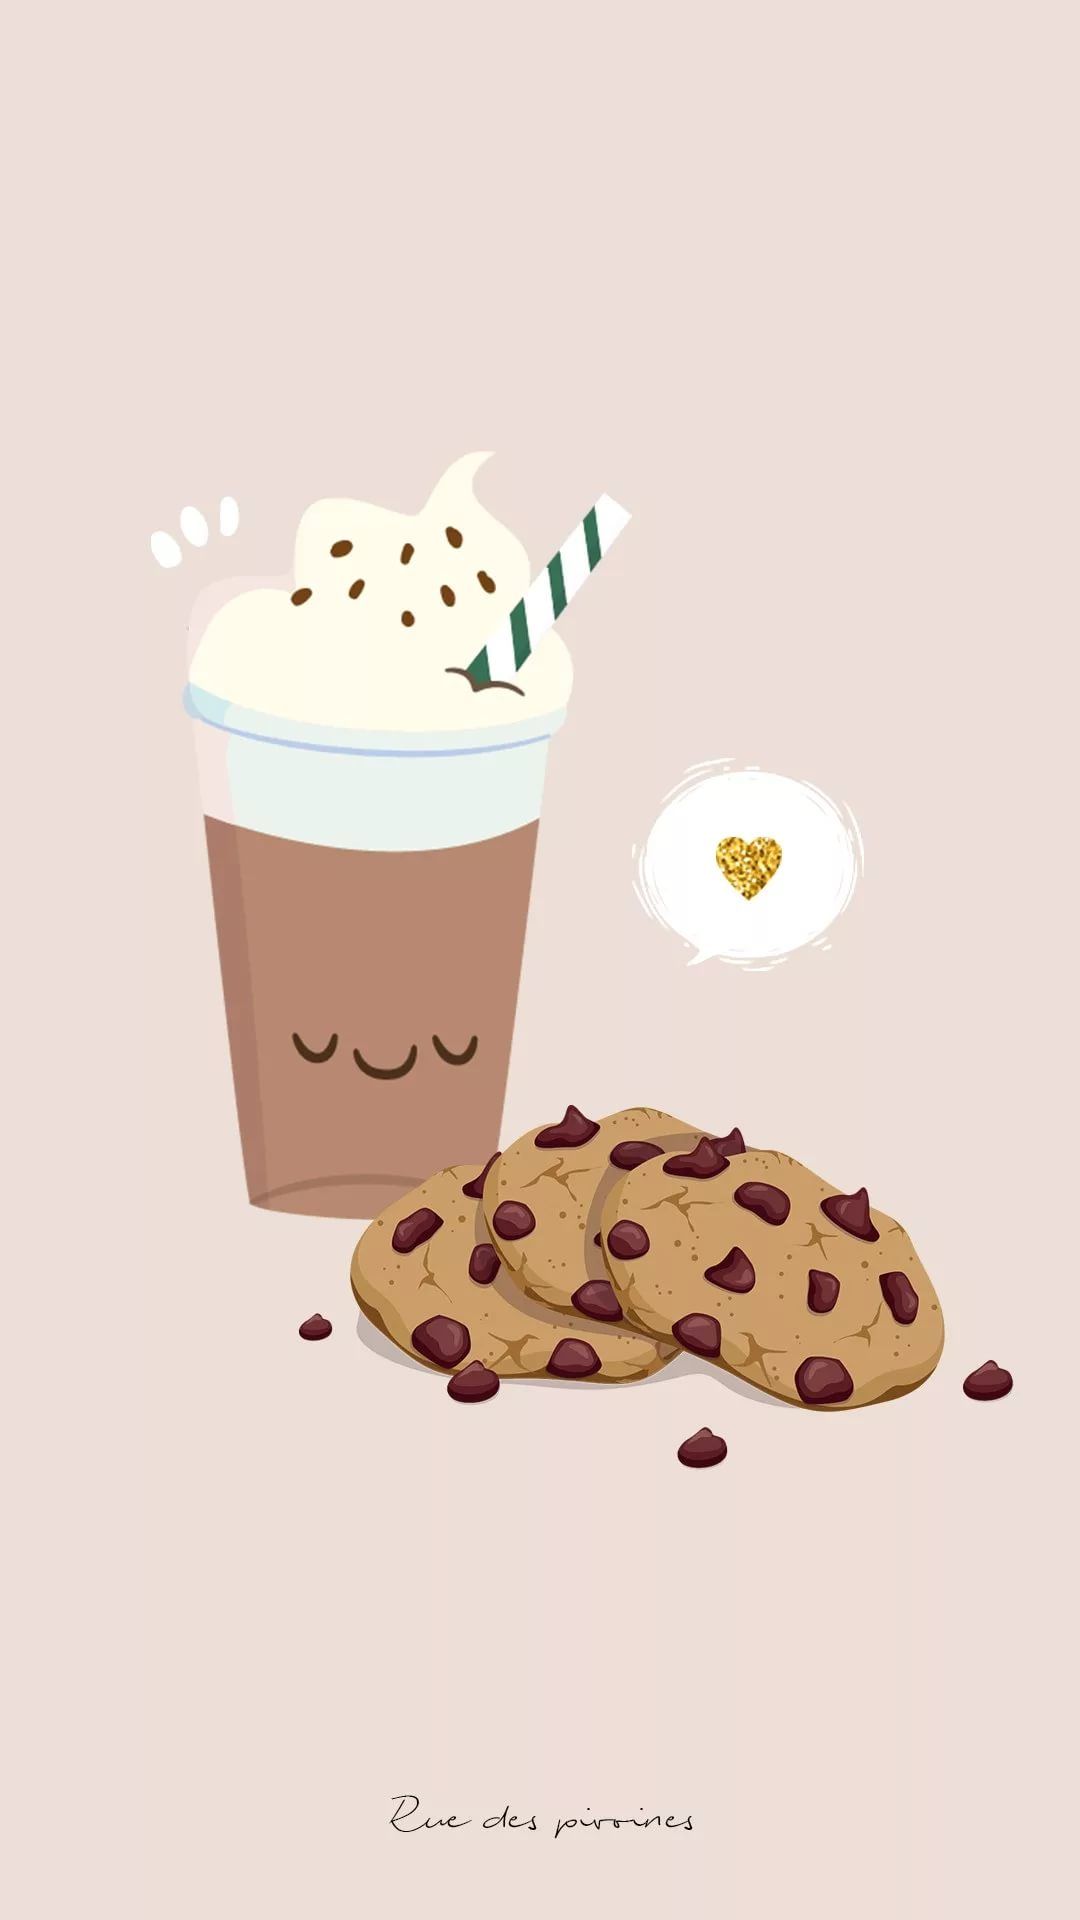 IPhone wallpaper of a chocolate chip cookie and a frappuccino - Starbucks, foodie, food, chocolate